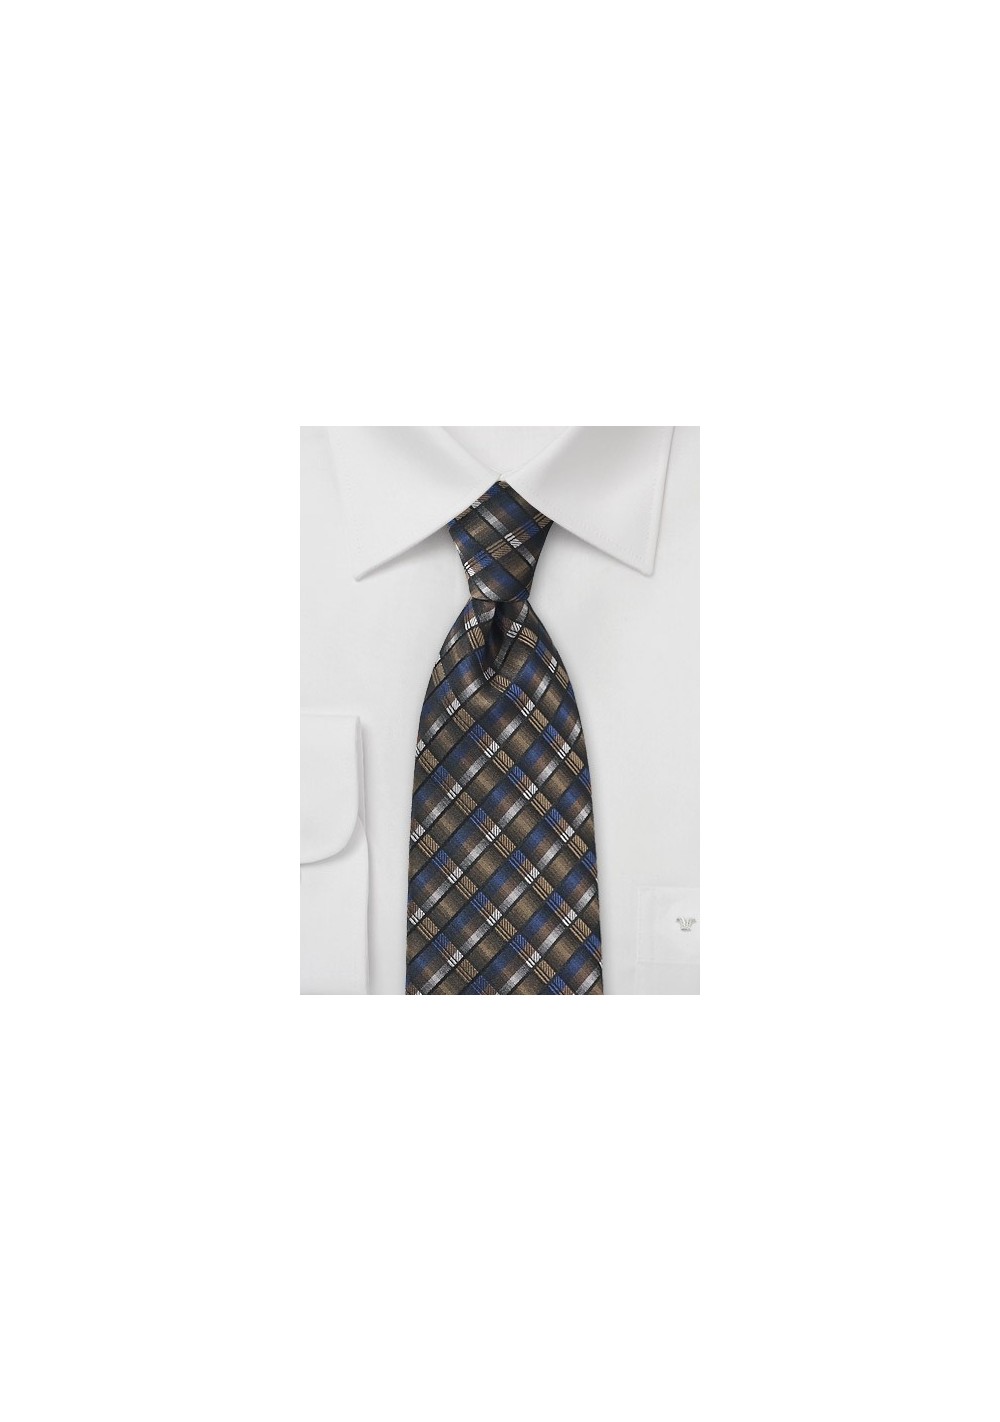 Modern Grid Patterned Tie in Gold, Blue and Black